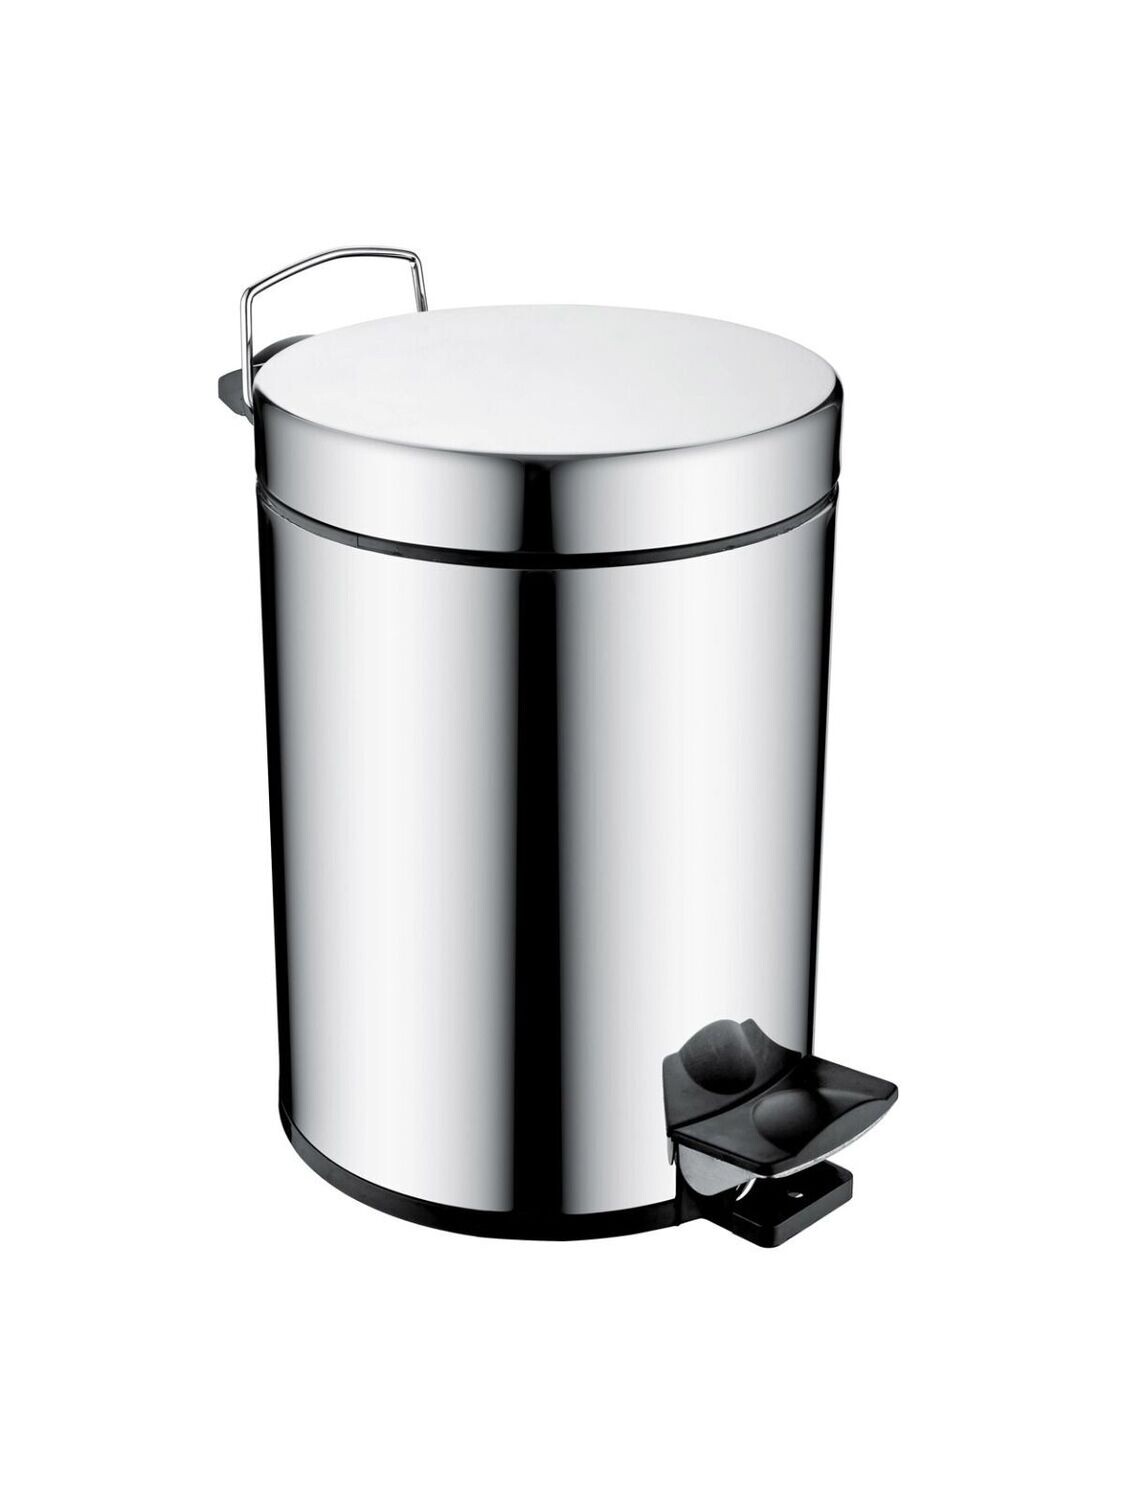 Perilla 20L stainless steel Pedal bin Chrome 20L Bathroom, Bedroom, Office, Mini Garbage can with Foot Pedal for Small Space,#83006